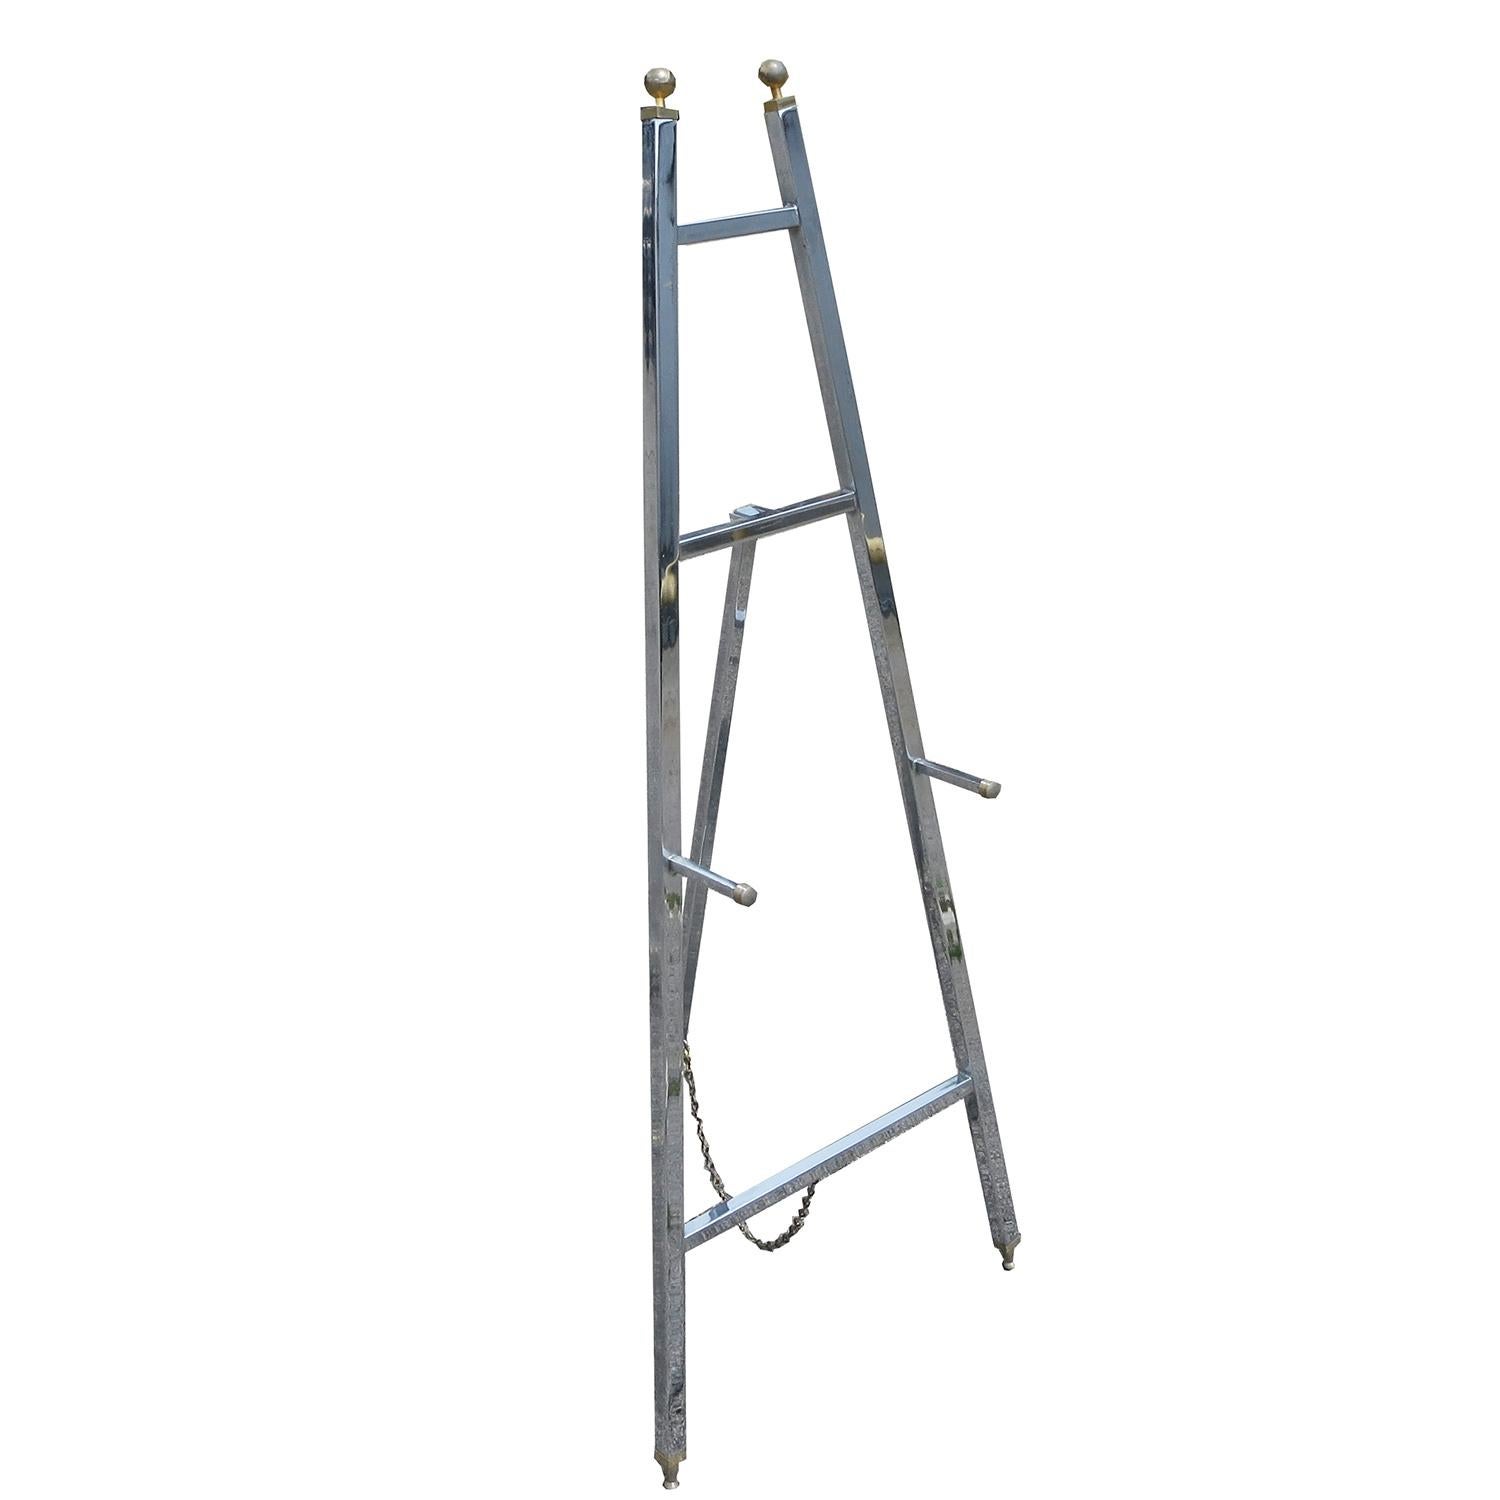 Want to display your art in a stylish, modern way? This fantastic easel will highlight any work without distracting from the art. The easel is hollow chrome-plated steel tubes, capped with brass finials and feet. The chain allows for a great range